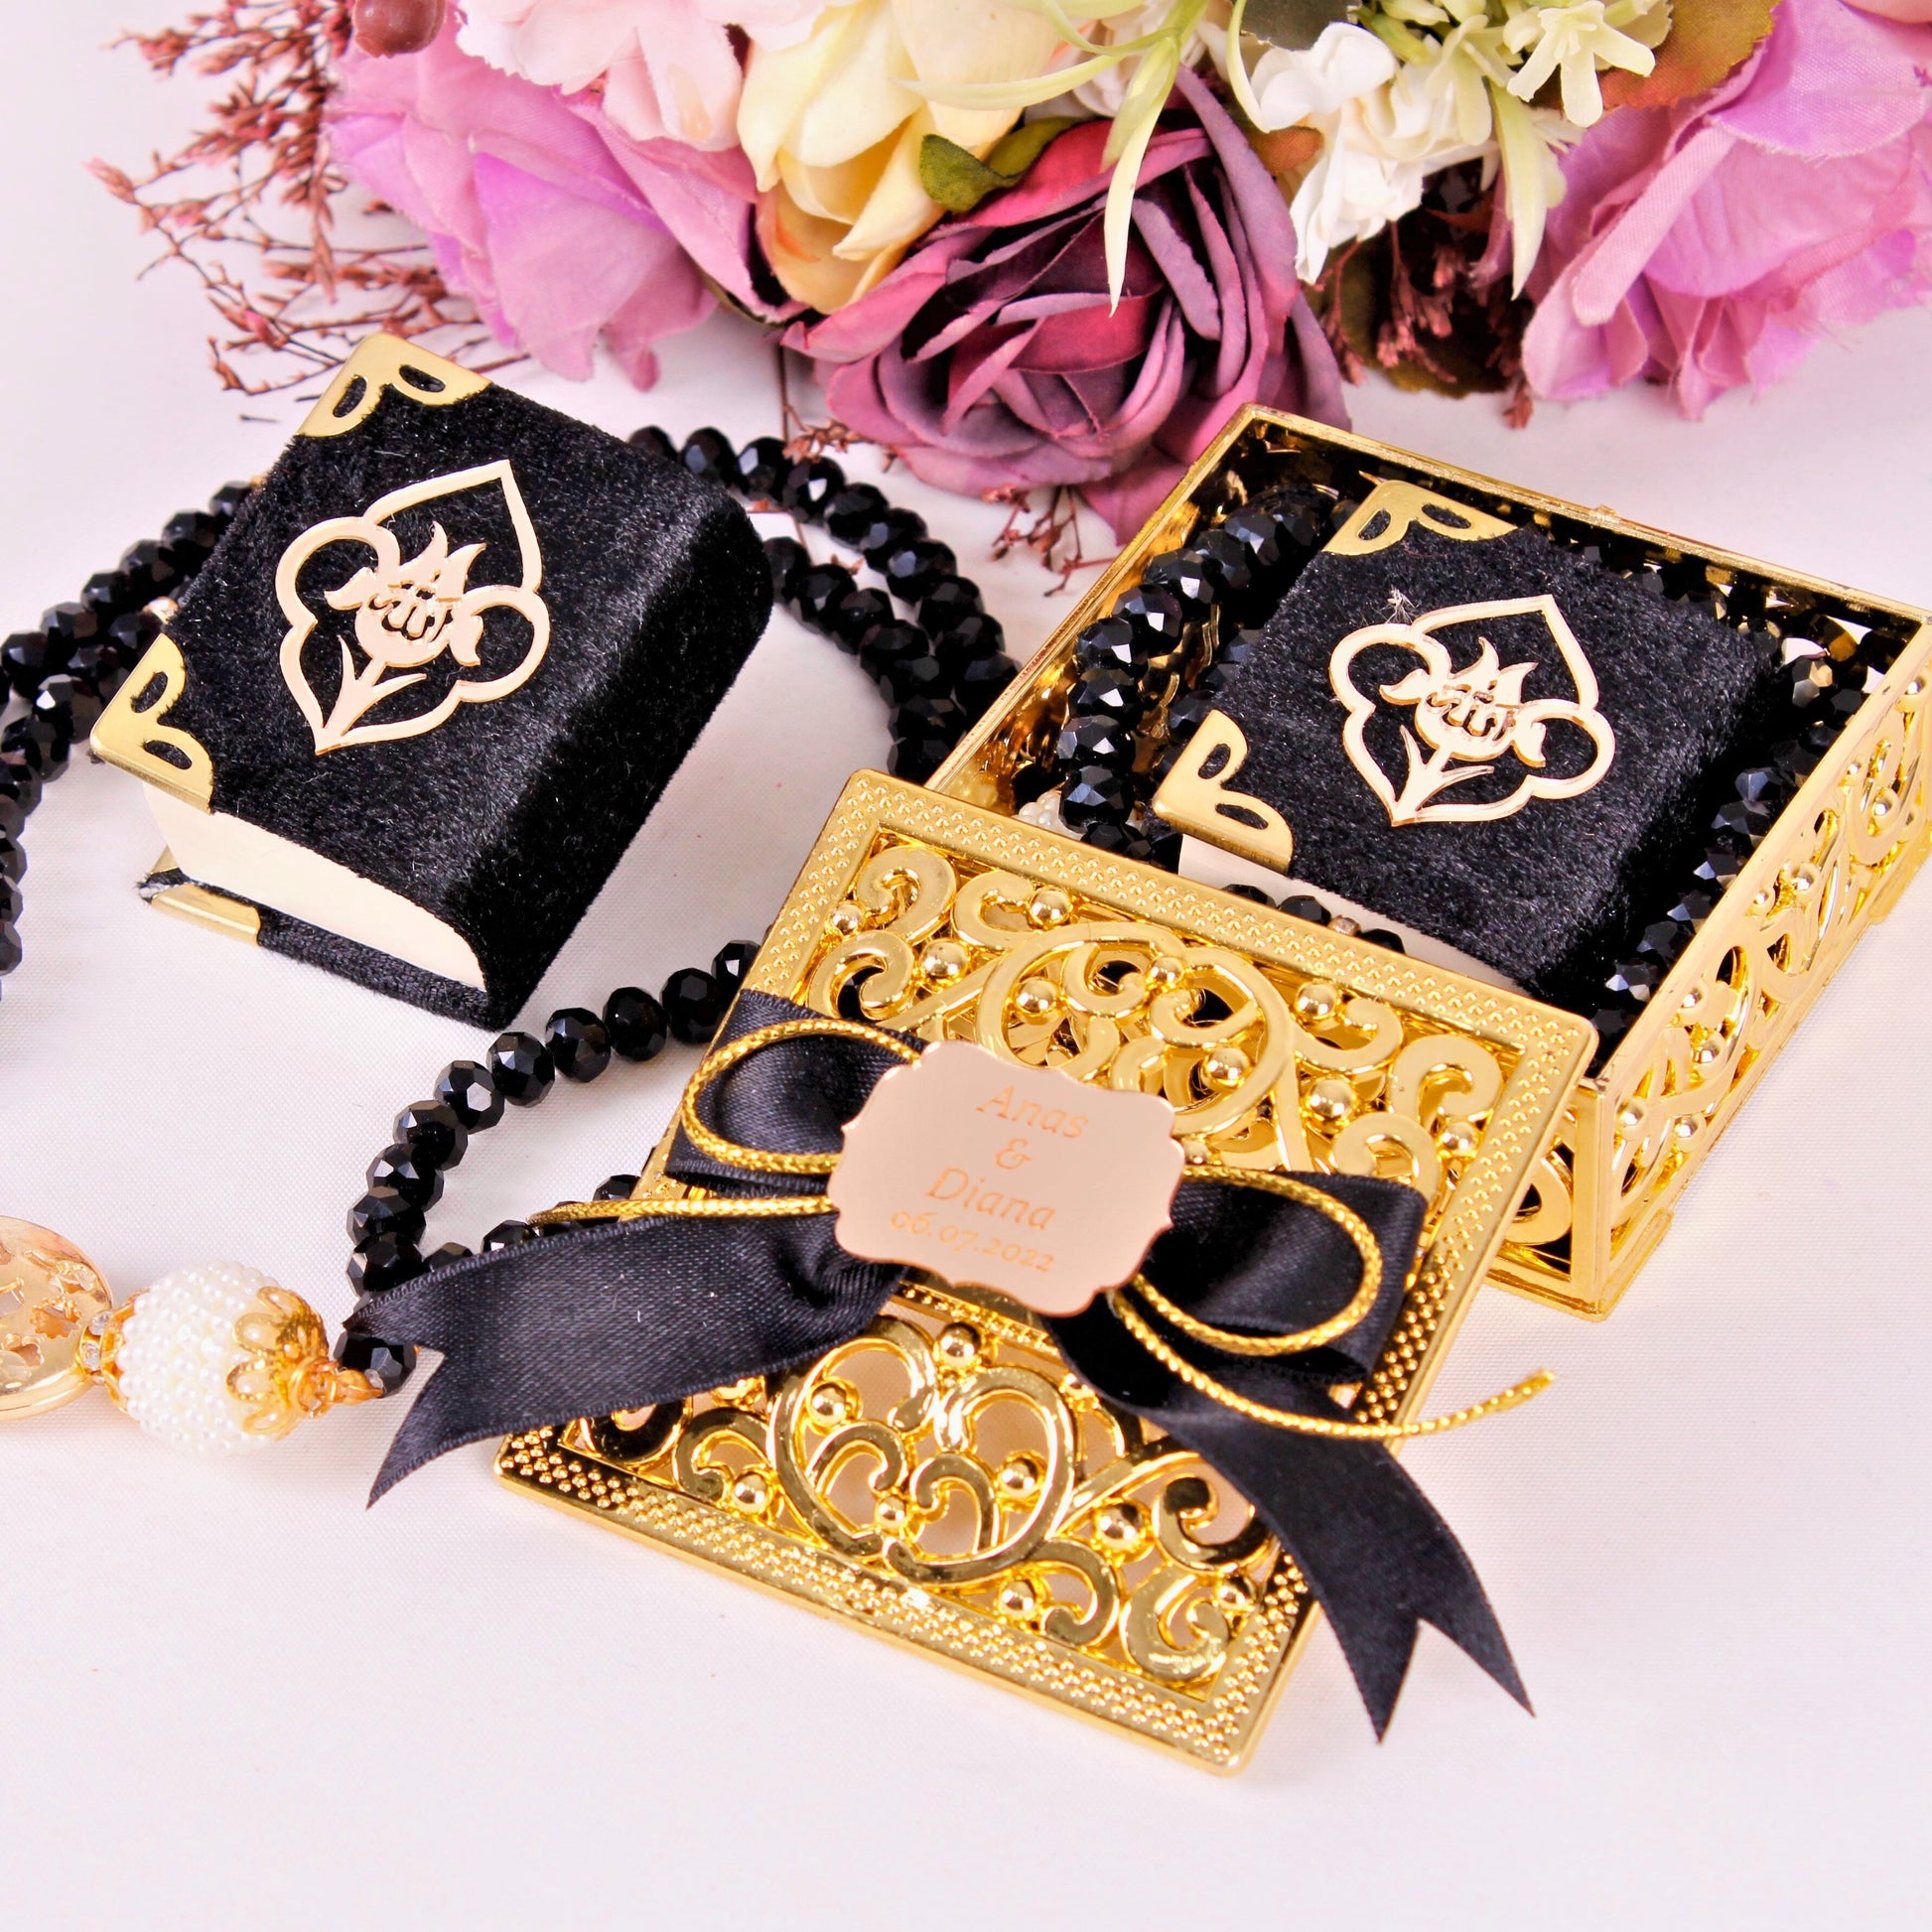 Personalized Wedding Favor Stylish Mini Quran Crystal Tasbeeh Set - Islamic Elite Favors is a handmade gift shop offering a wide variety of unique and personalized gifts for all occasions. Whether you're looking for the perfect Ramadan, Eid, Hajj, wedding gift or something special for a birthday, baby shower or anniversary, we have something for everyone. High quality, made with love.